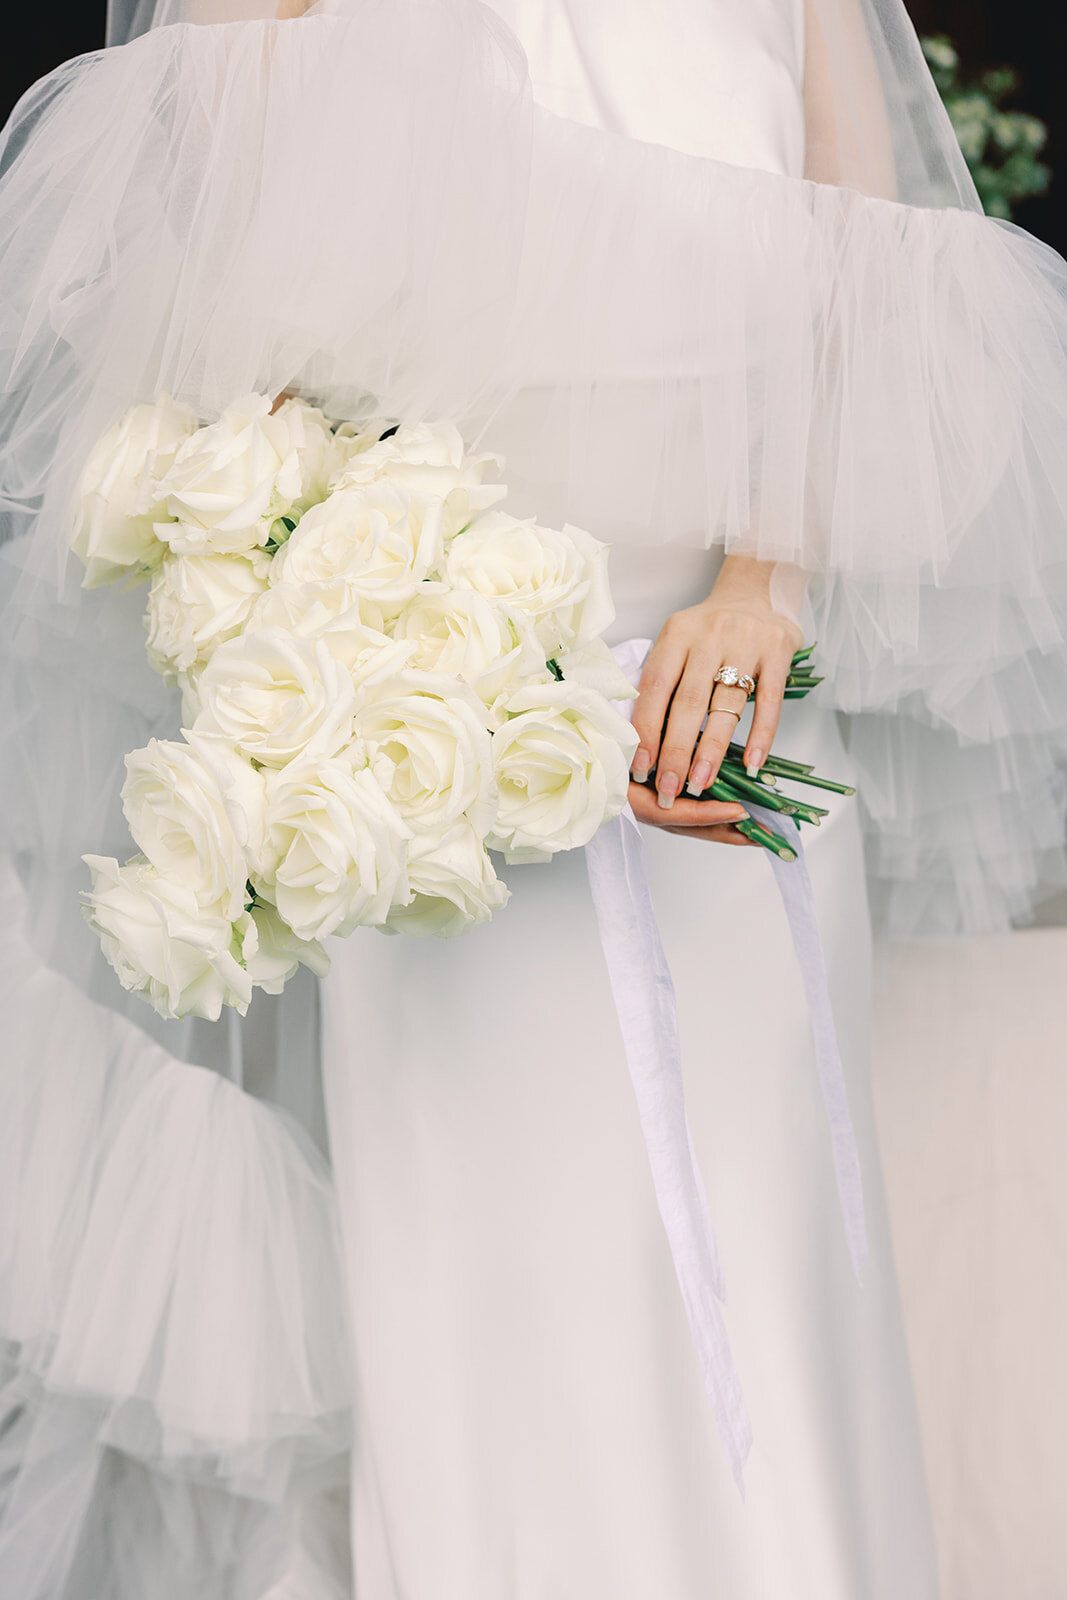 Bride holding a bouquet of white flowers